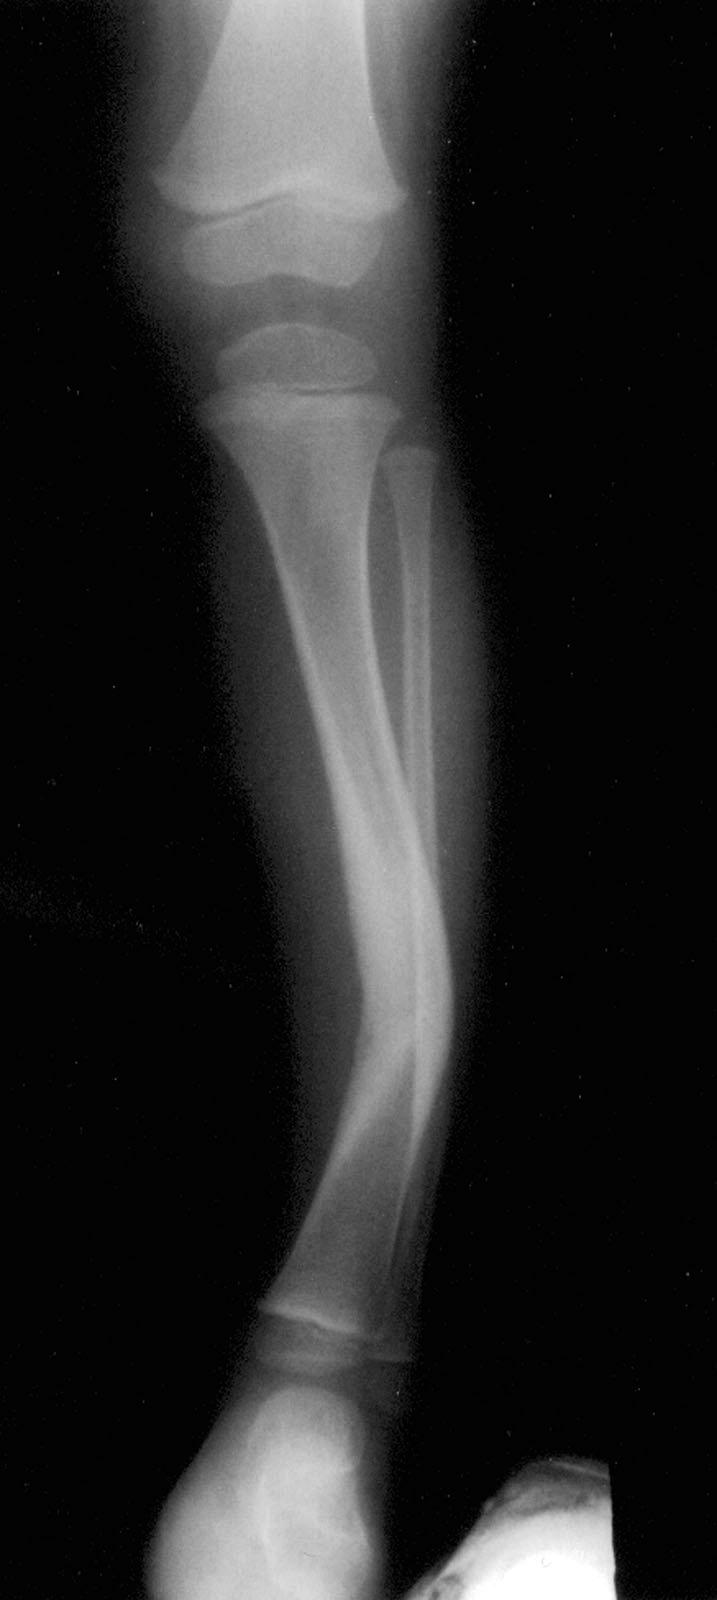 Ten patients had a fibular pseudarthrosis at the time of the intramedullary nailing of the tibia.